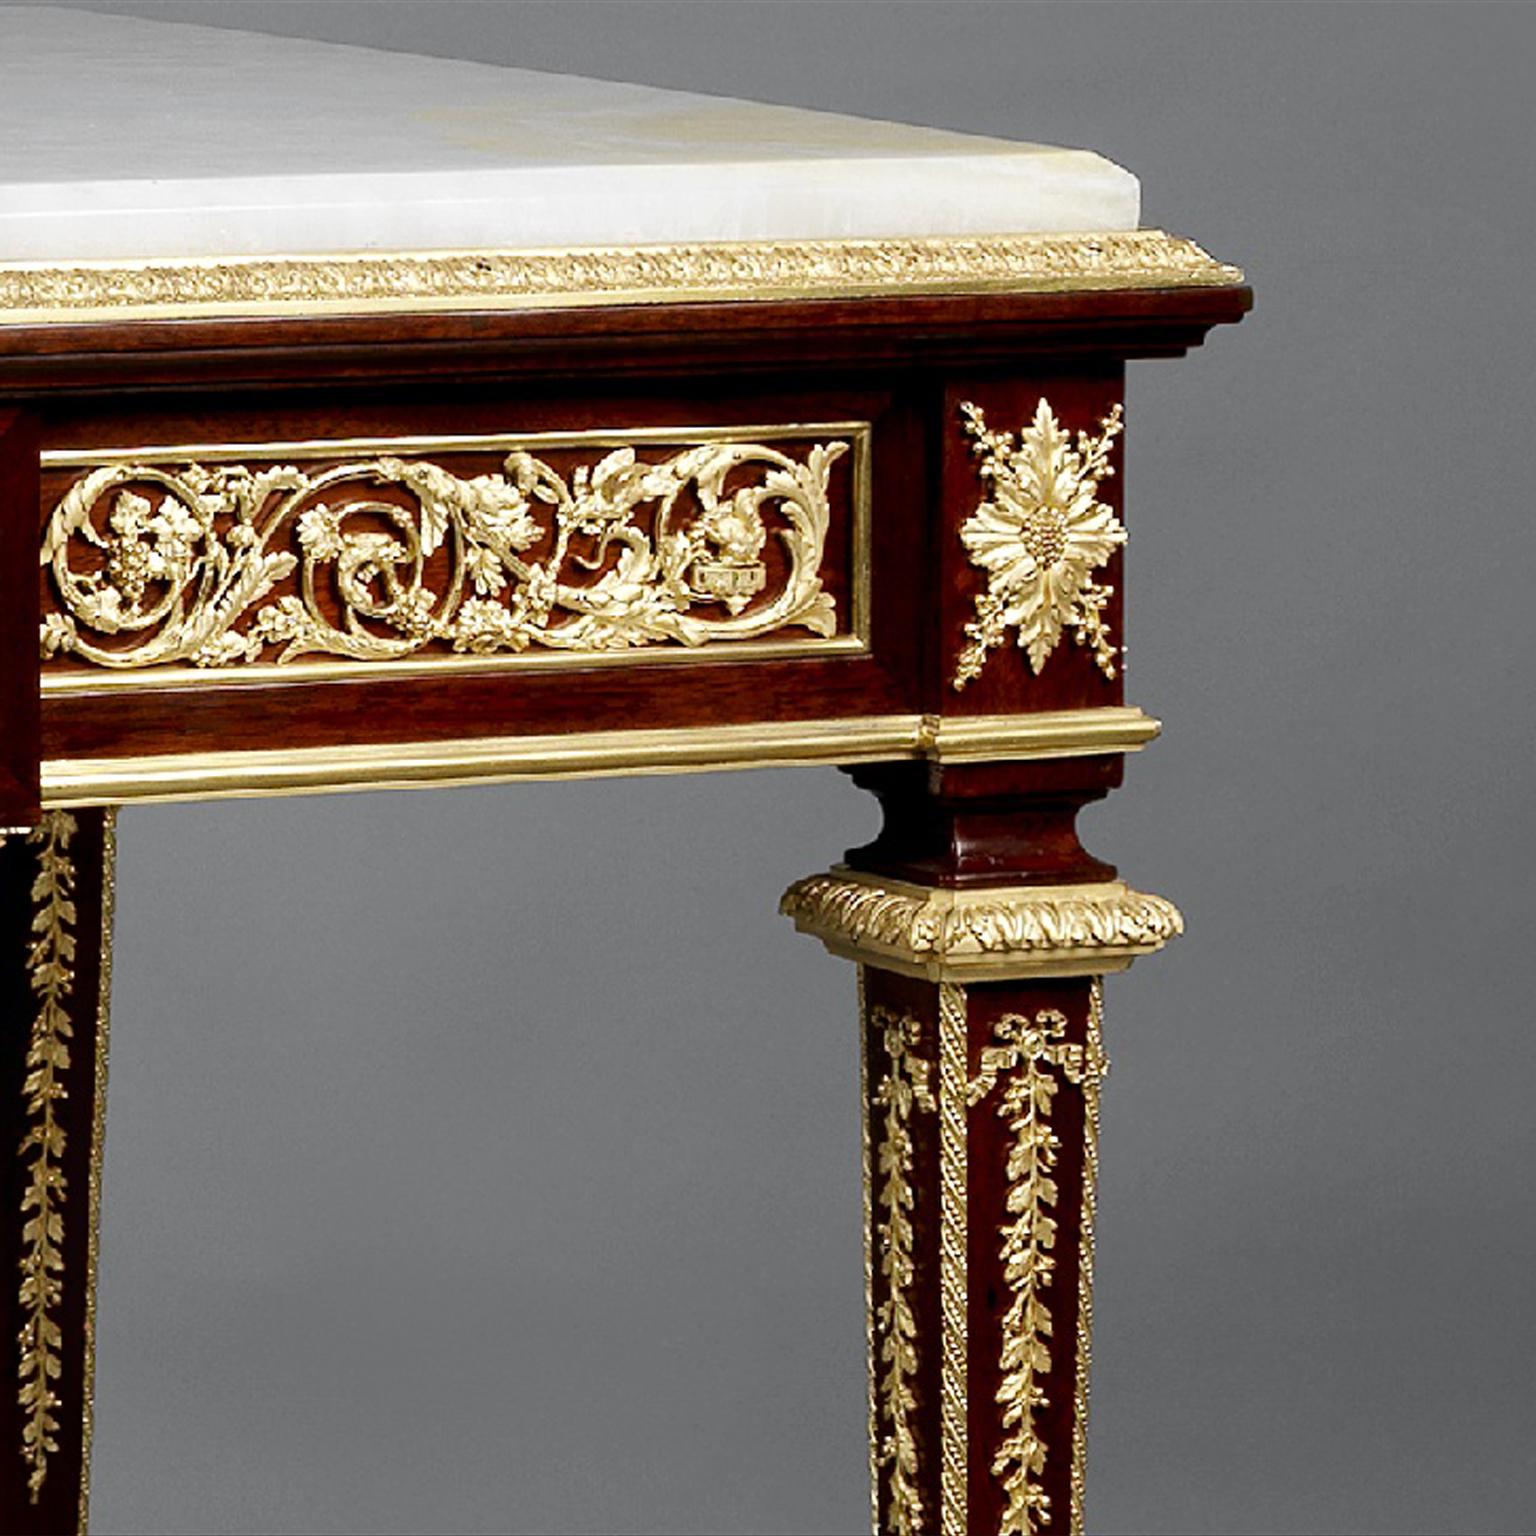 A fine gilt-bronze mounted mahogany centre table with an onyx marble top by François Linke.

Linke Index number: 118 Linke title: 'Table Louis XVI, bois d'acajou bronze dorés.'

This fine gilt-bronze mounted mahogany table de milieu or centre